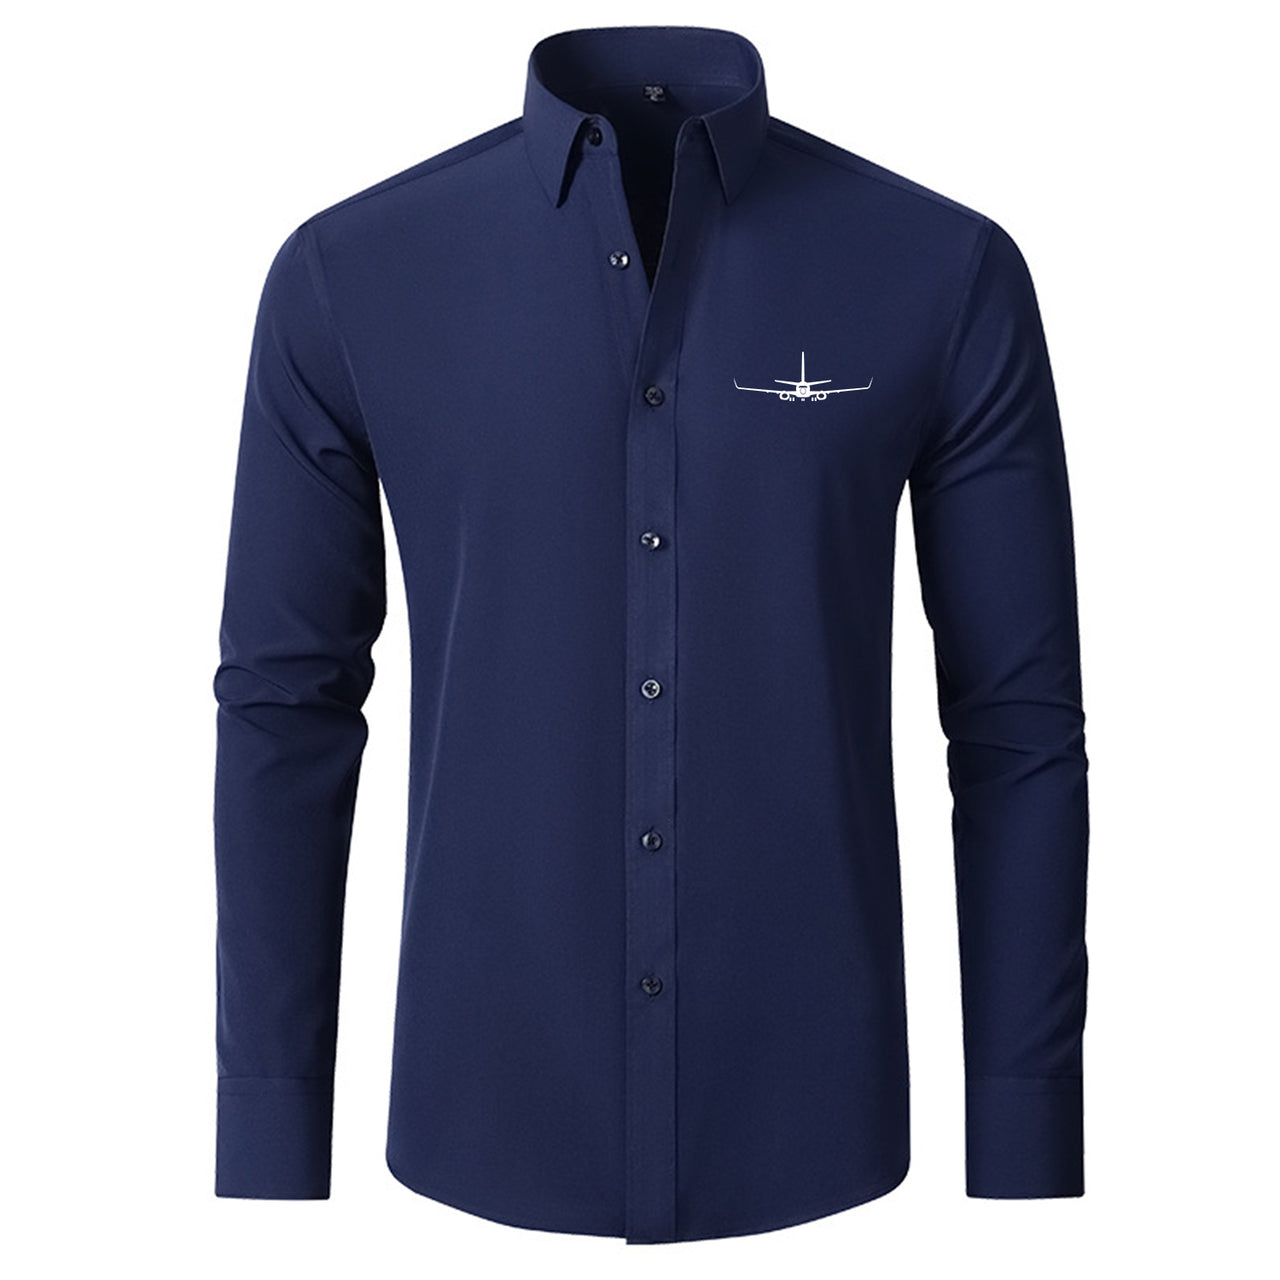 Boeing 737-800NG Silhouette Designed Long Sleeve Shirts